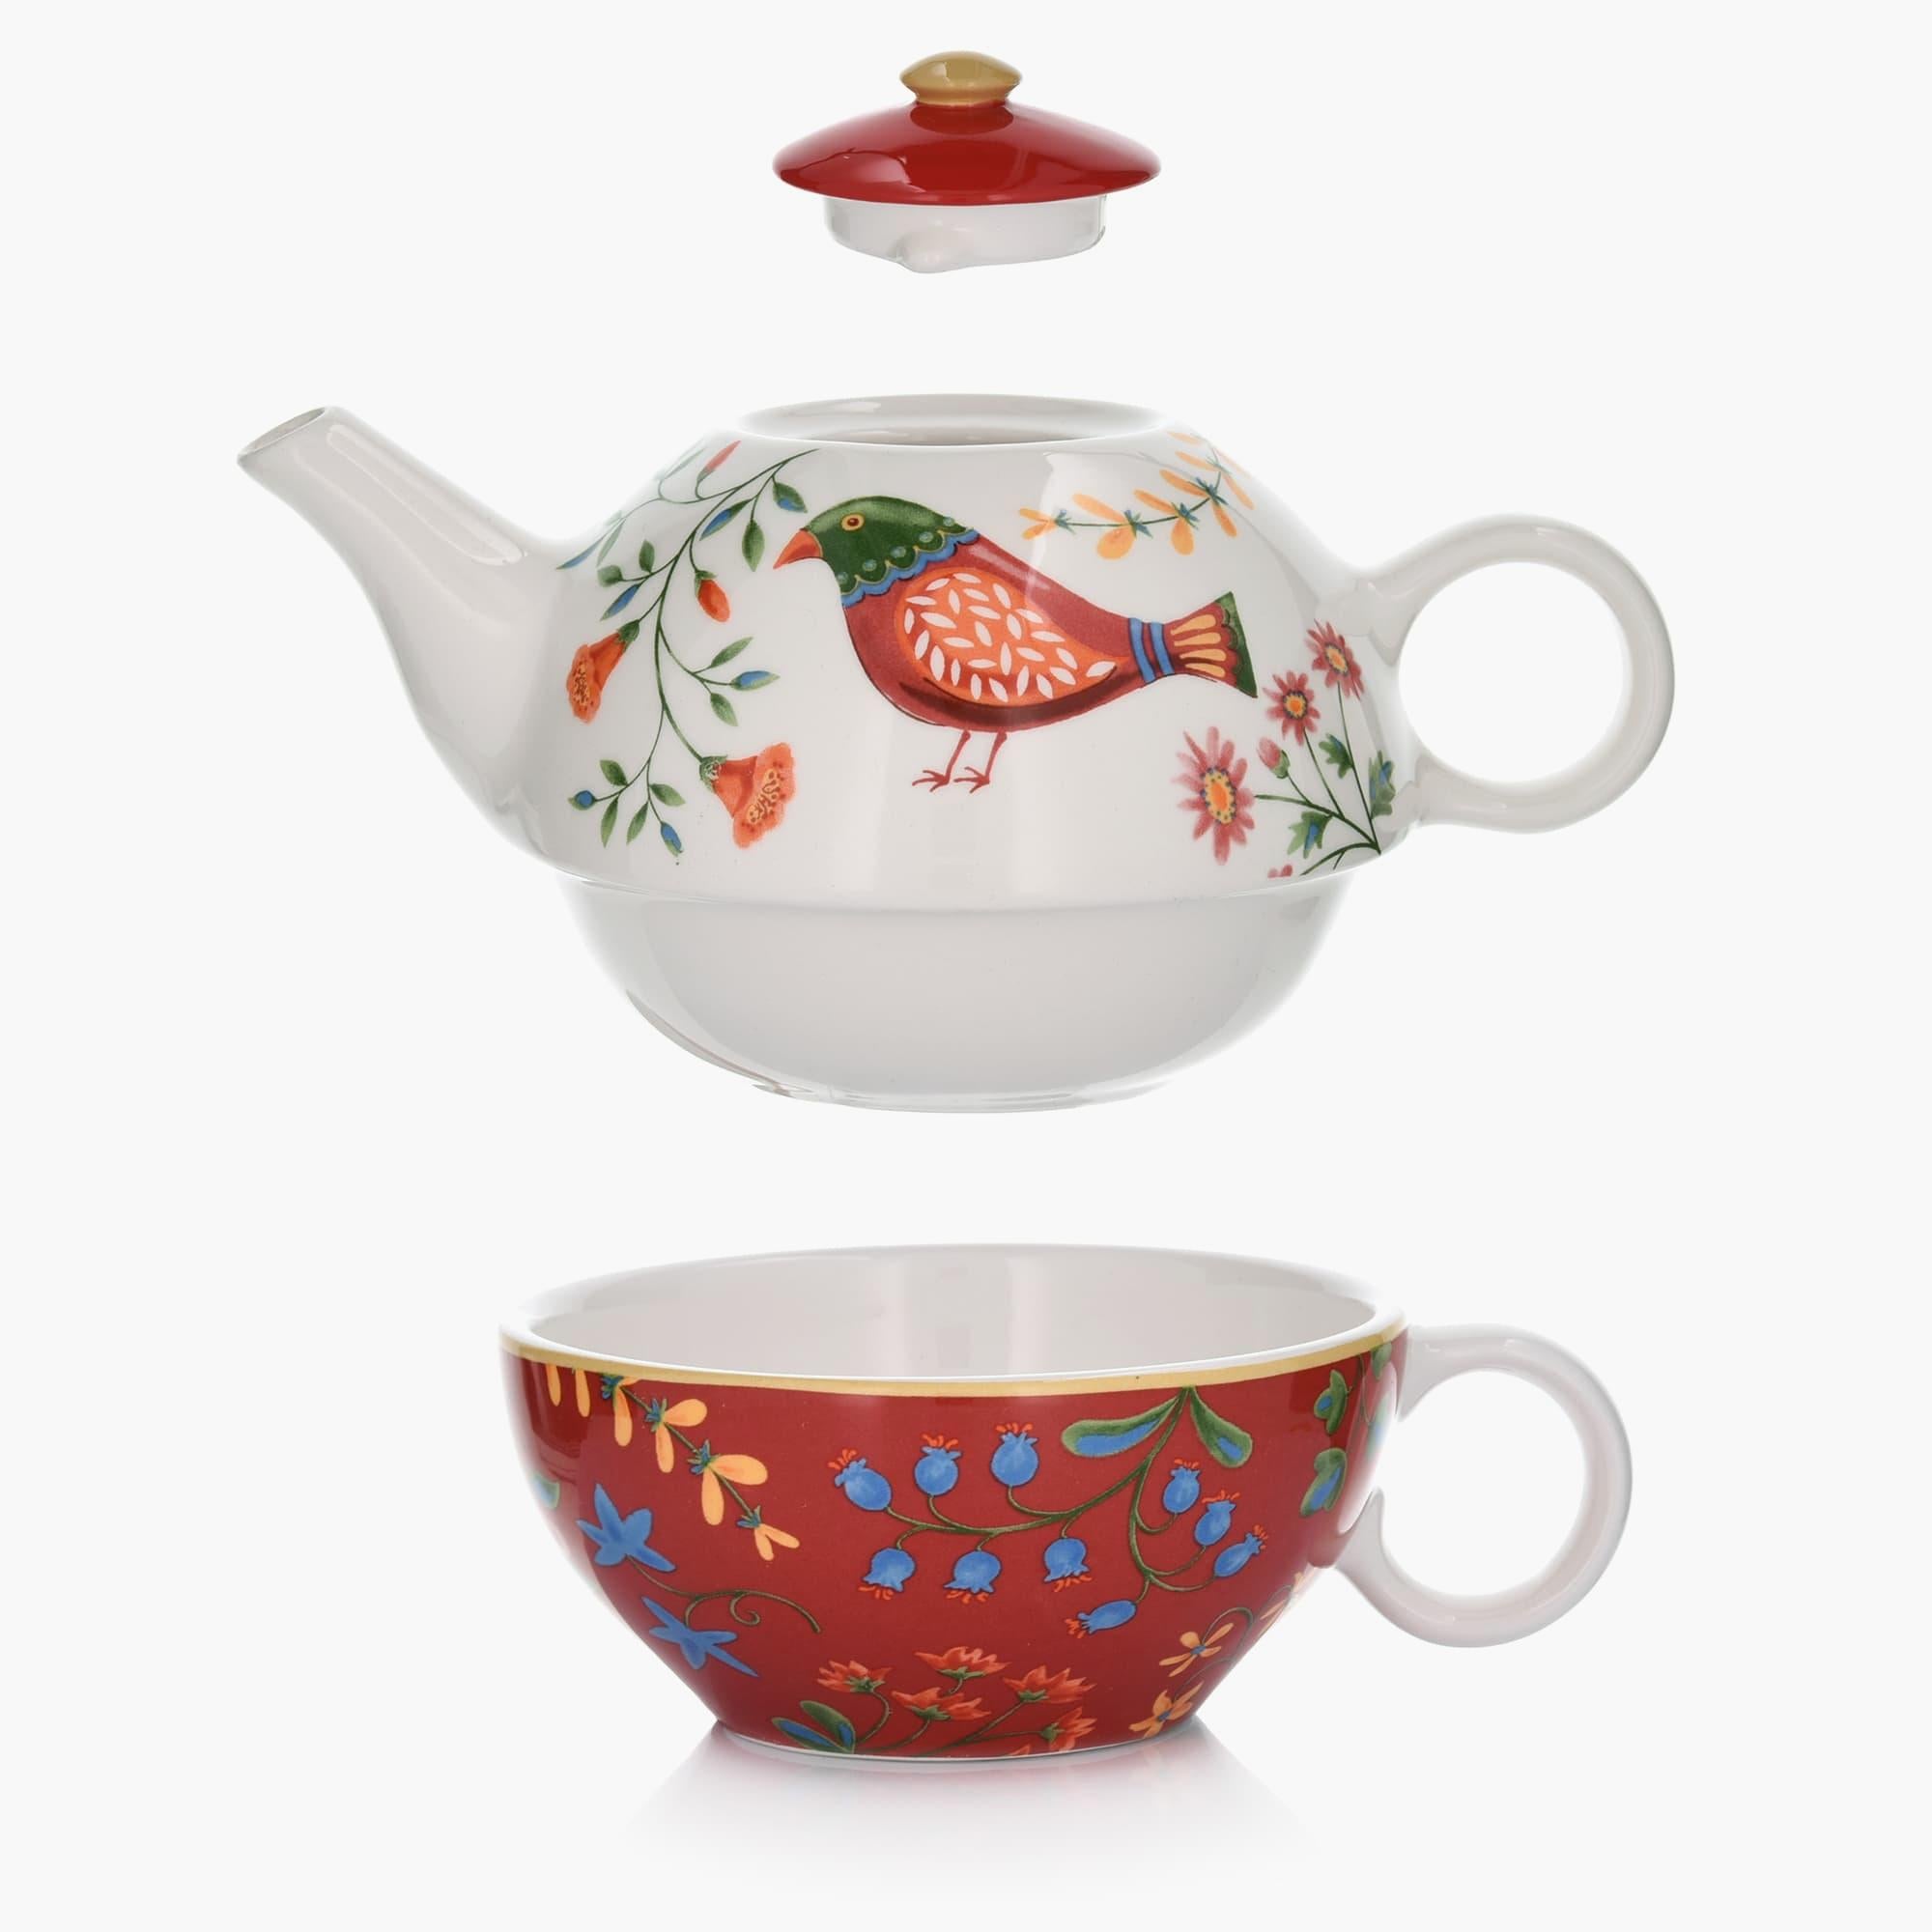 Folk Art Inspired Ceramic Teapot and Cup